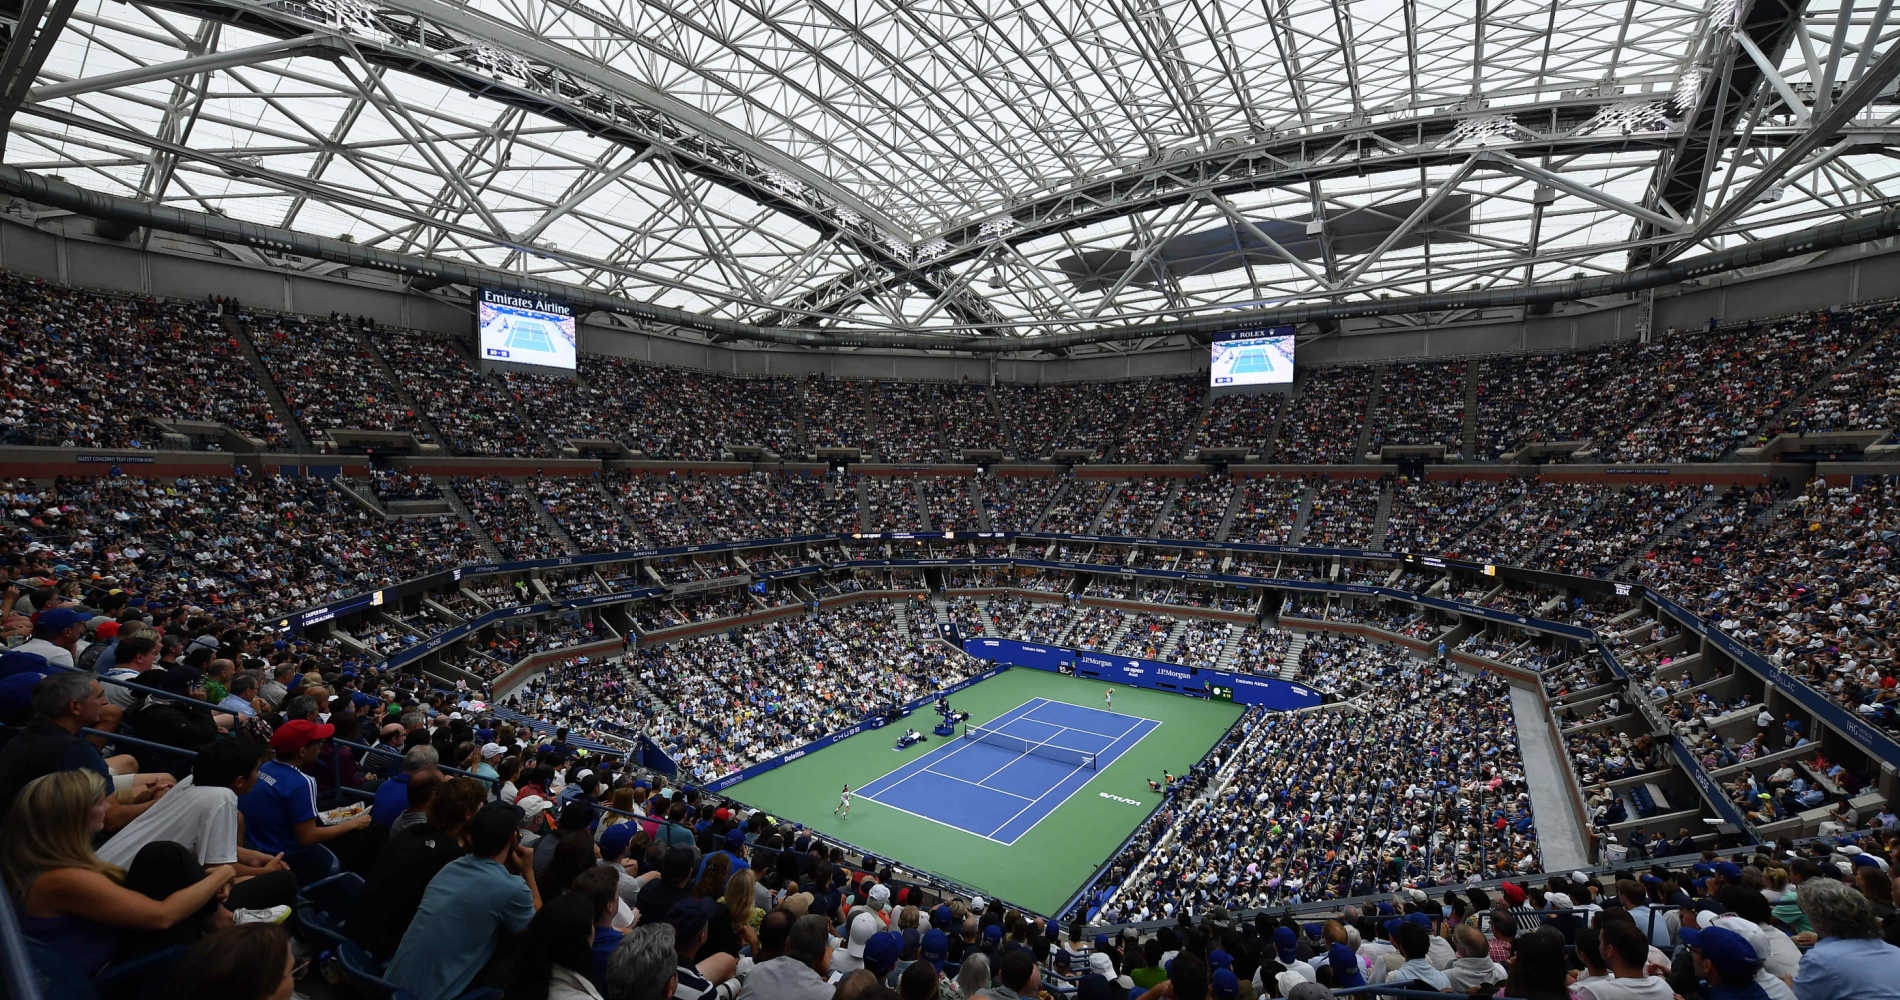 US Open singles champions will scoop $2.6m each in prize money this year |  Daily Mail Online